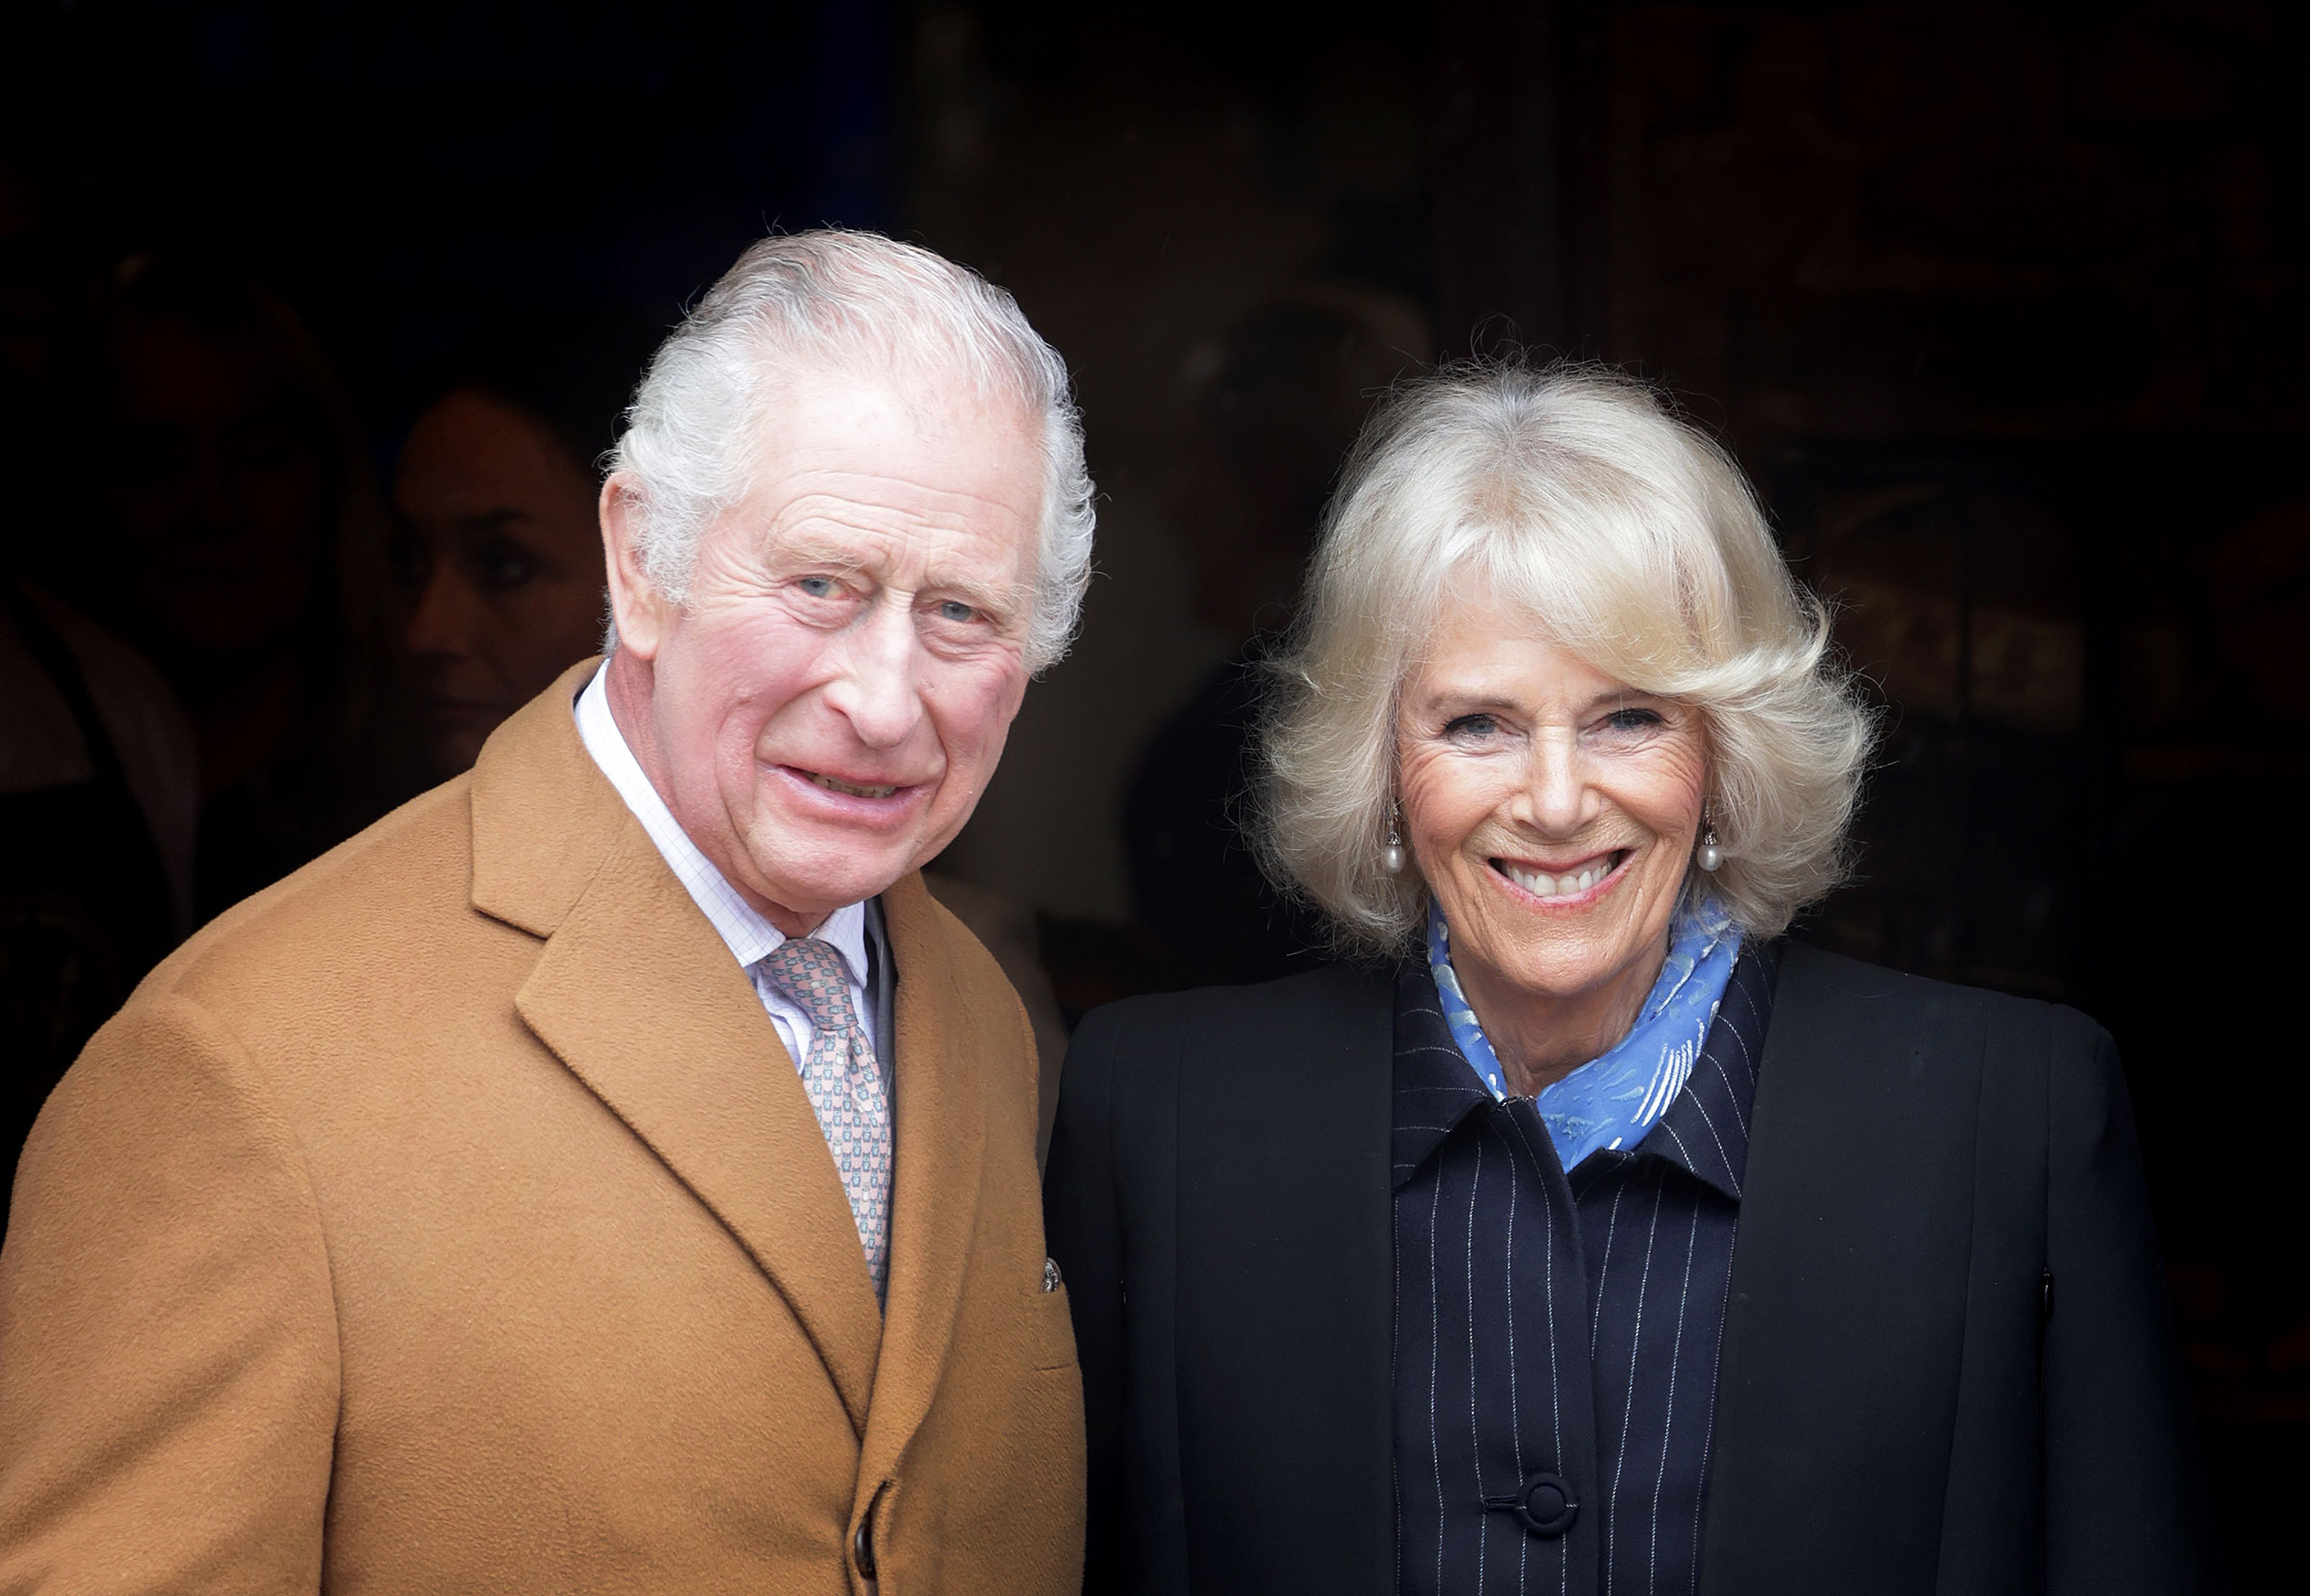 King Charles III And The Queen Consort Visit Malton In Yorkshire